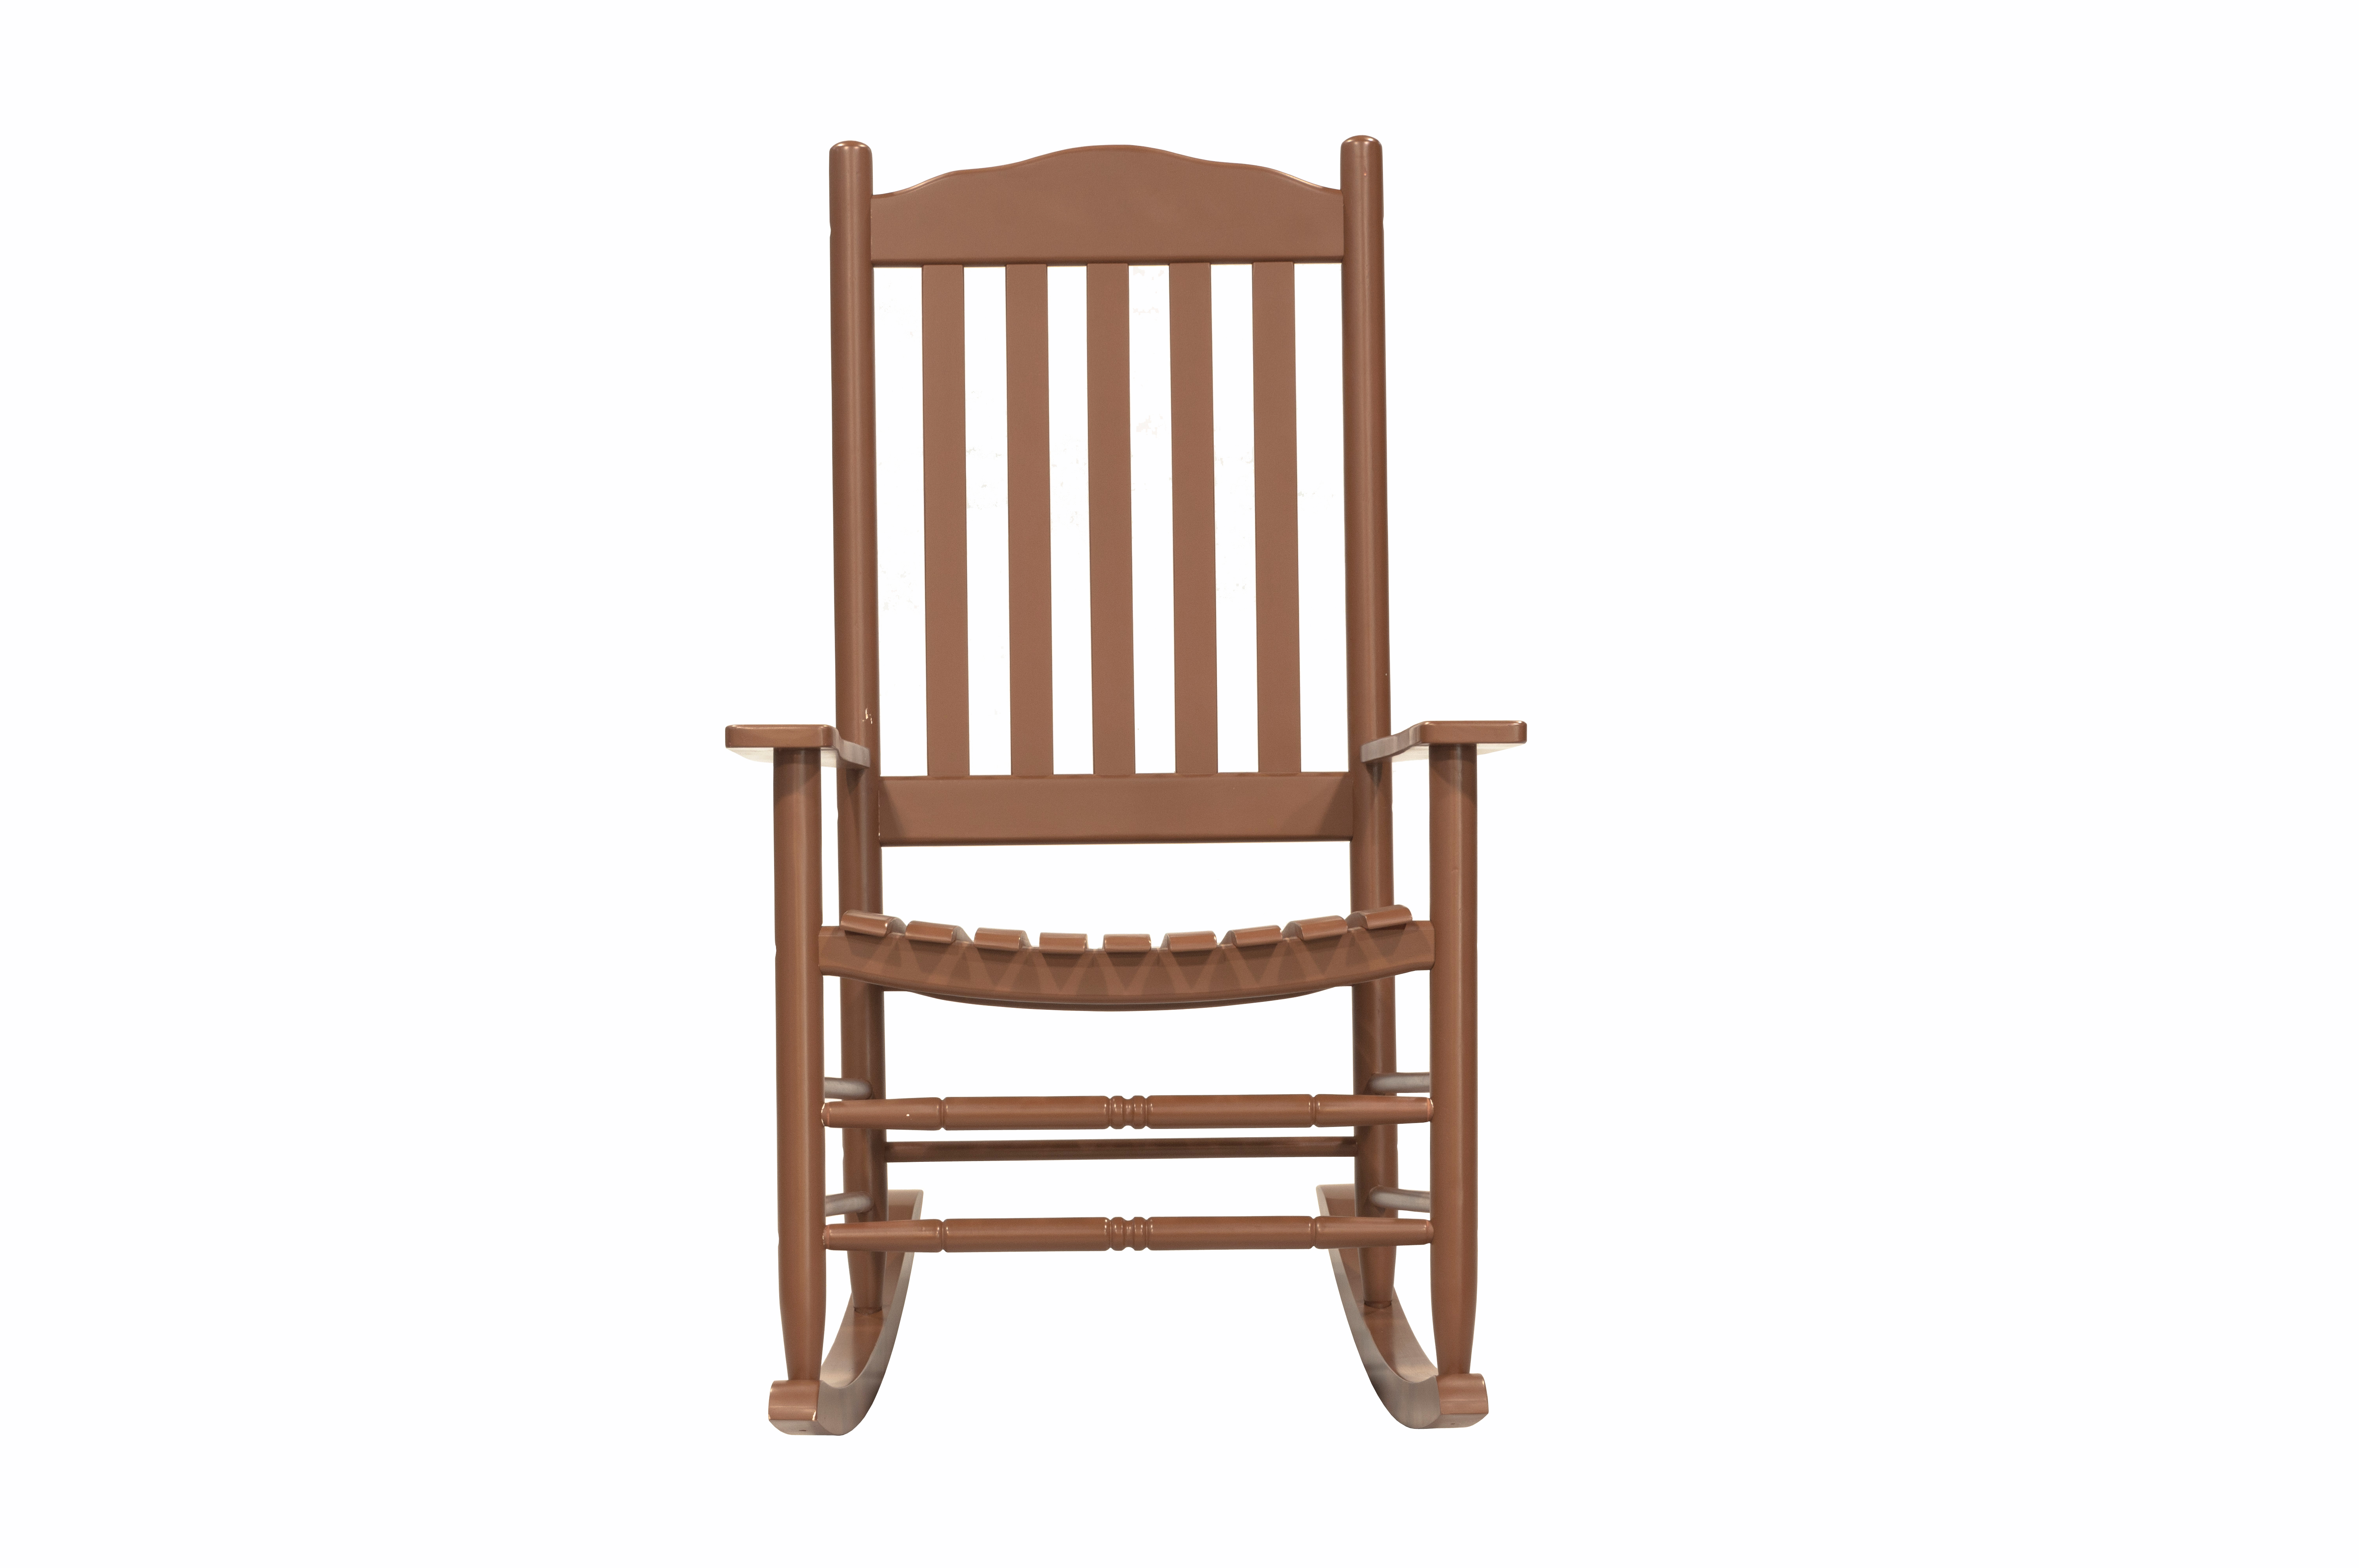 Outdoor Patio Garden Furniture 3-Piece Wood Porch Rocking Chair Set, Weather Resistant Finish,2 Rocking Chairs and 1 Side Table-Brown - image 4 of 11